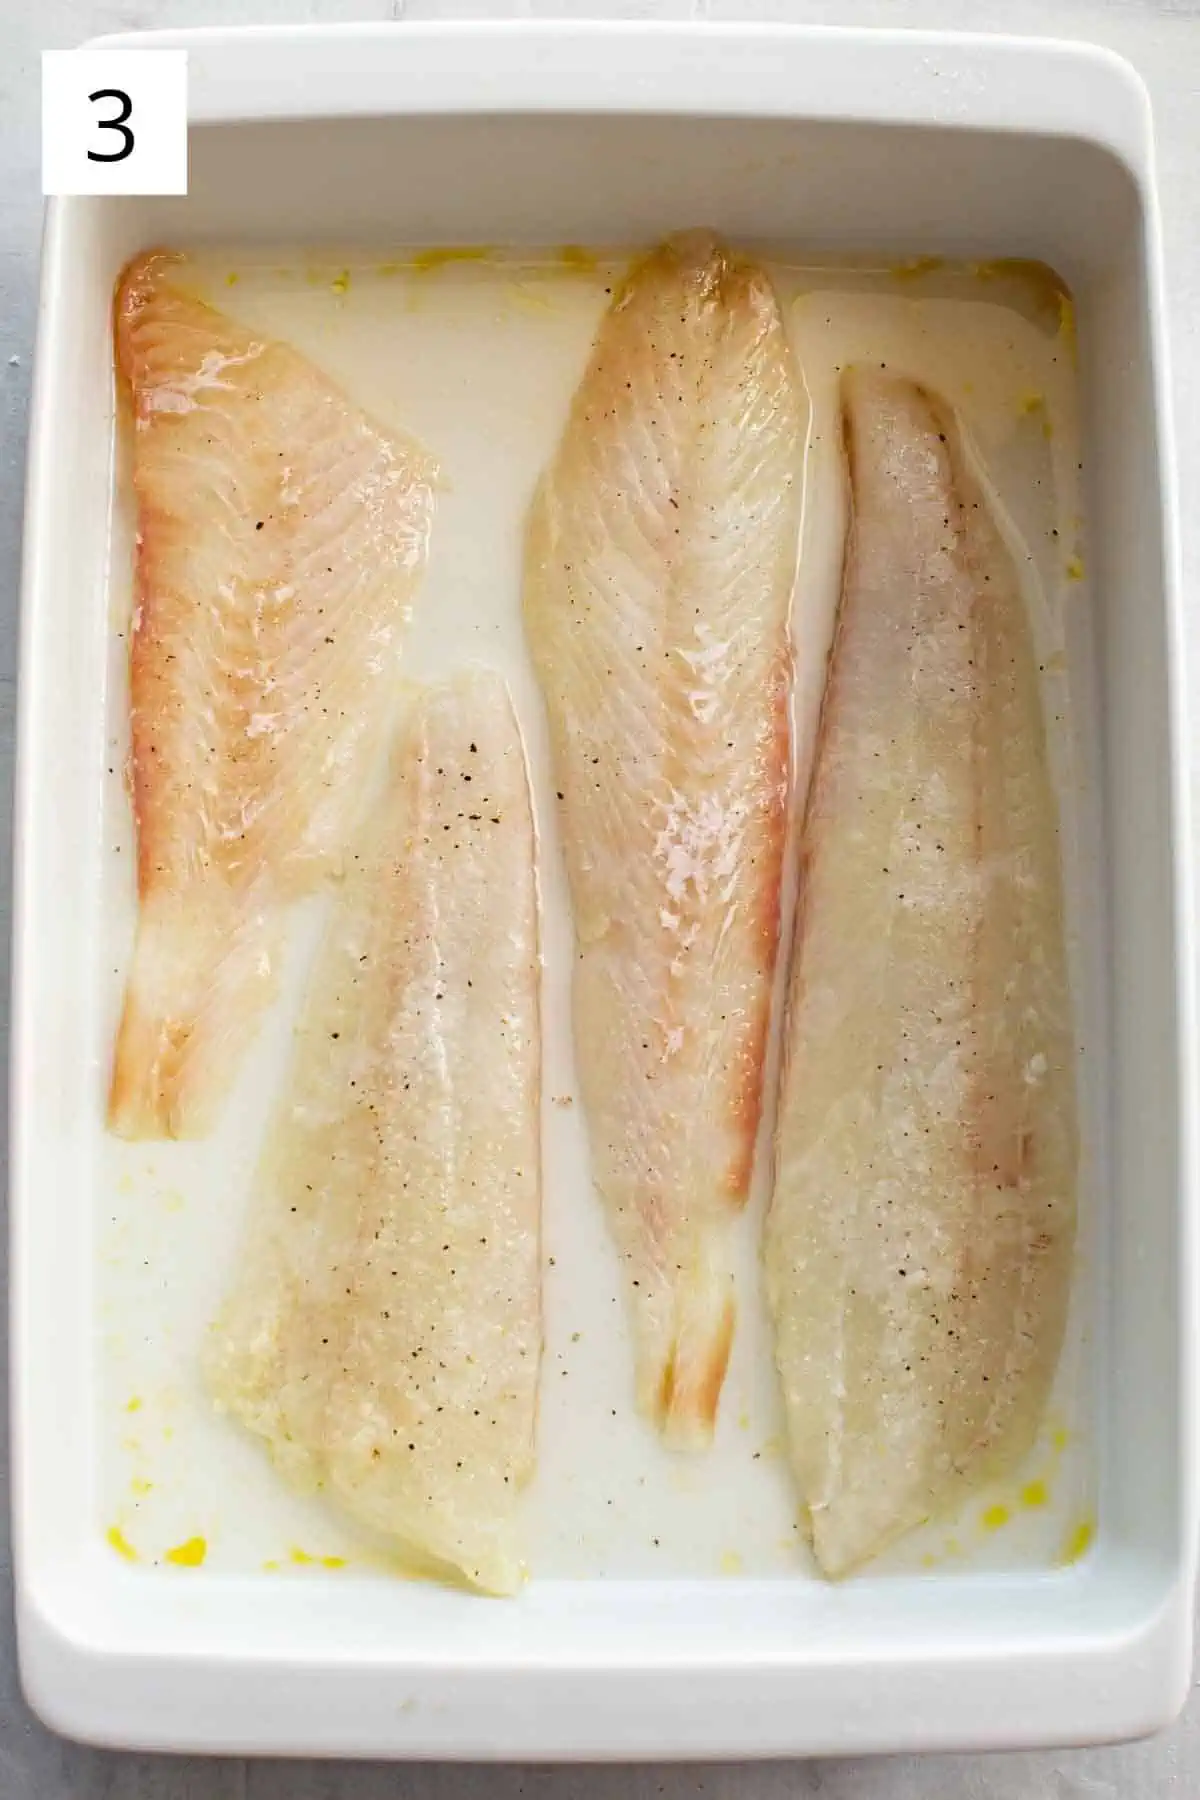 Raw flounder fillets in a baking dish.